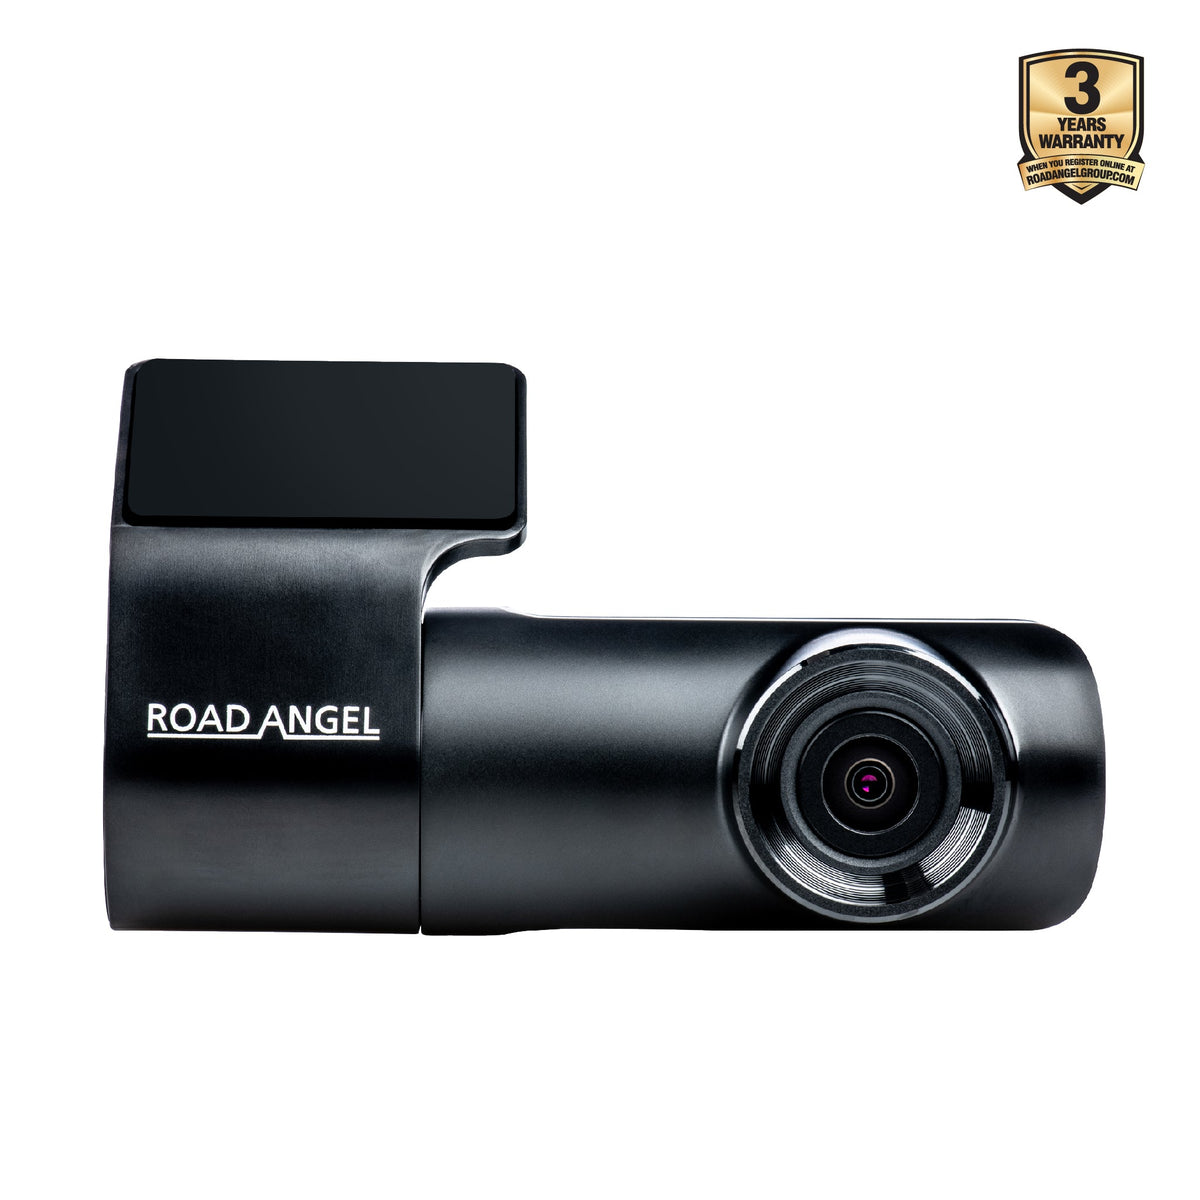 NEW - Road Angel Halo Start 1080p Full HD Compact Dash Cam With Quick Release Mount with SD Card & Hardwiring Kit Bundle